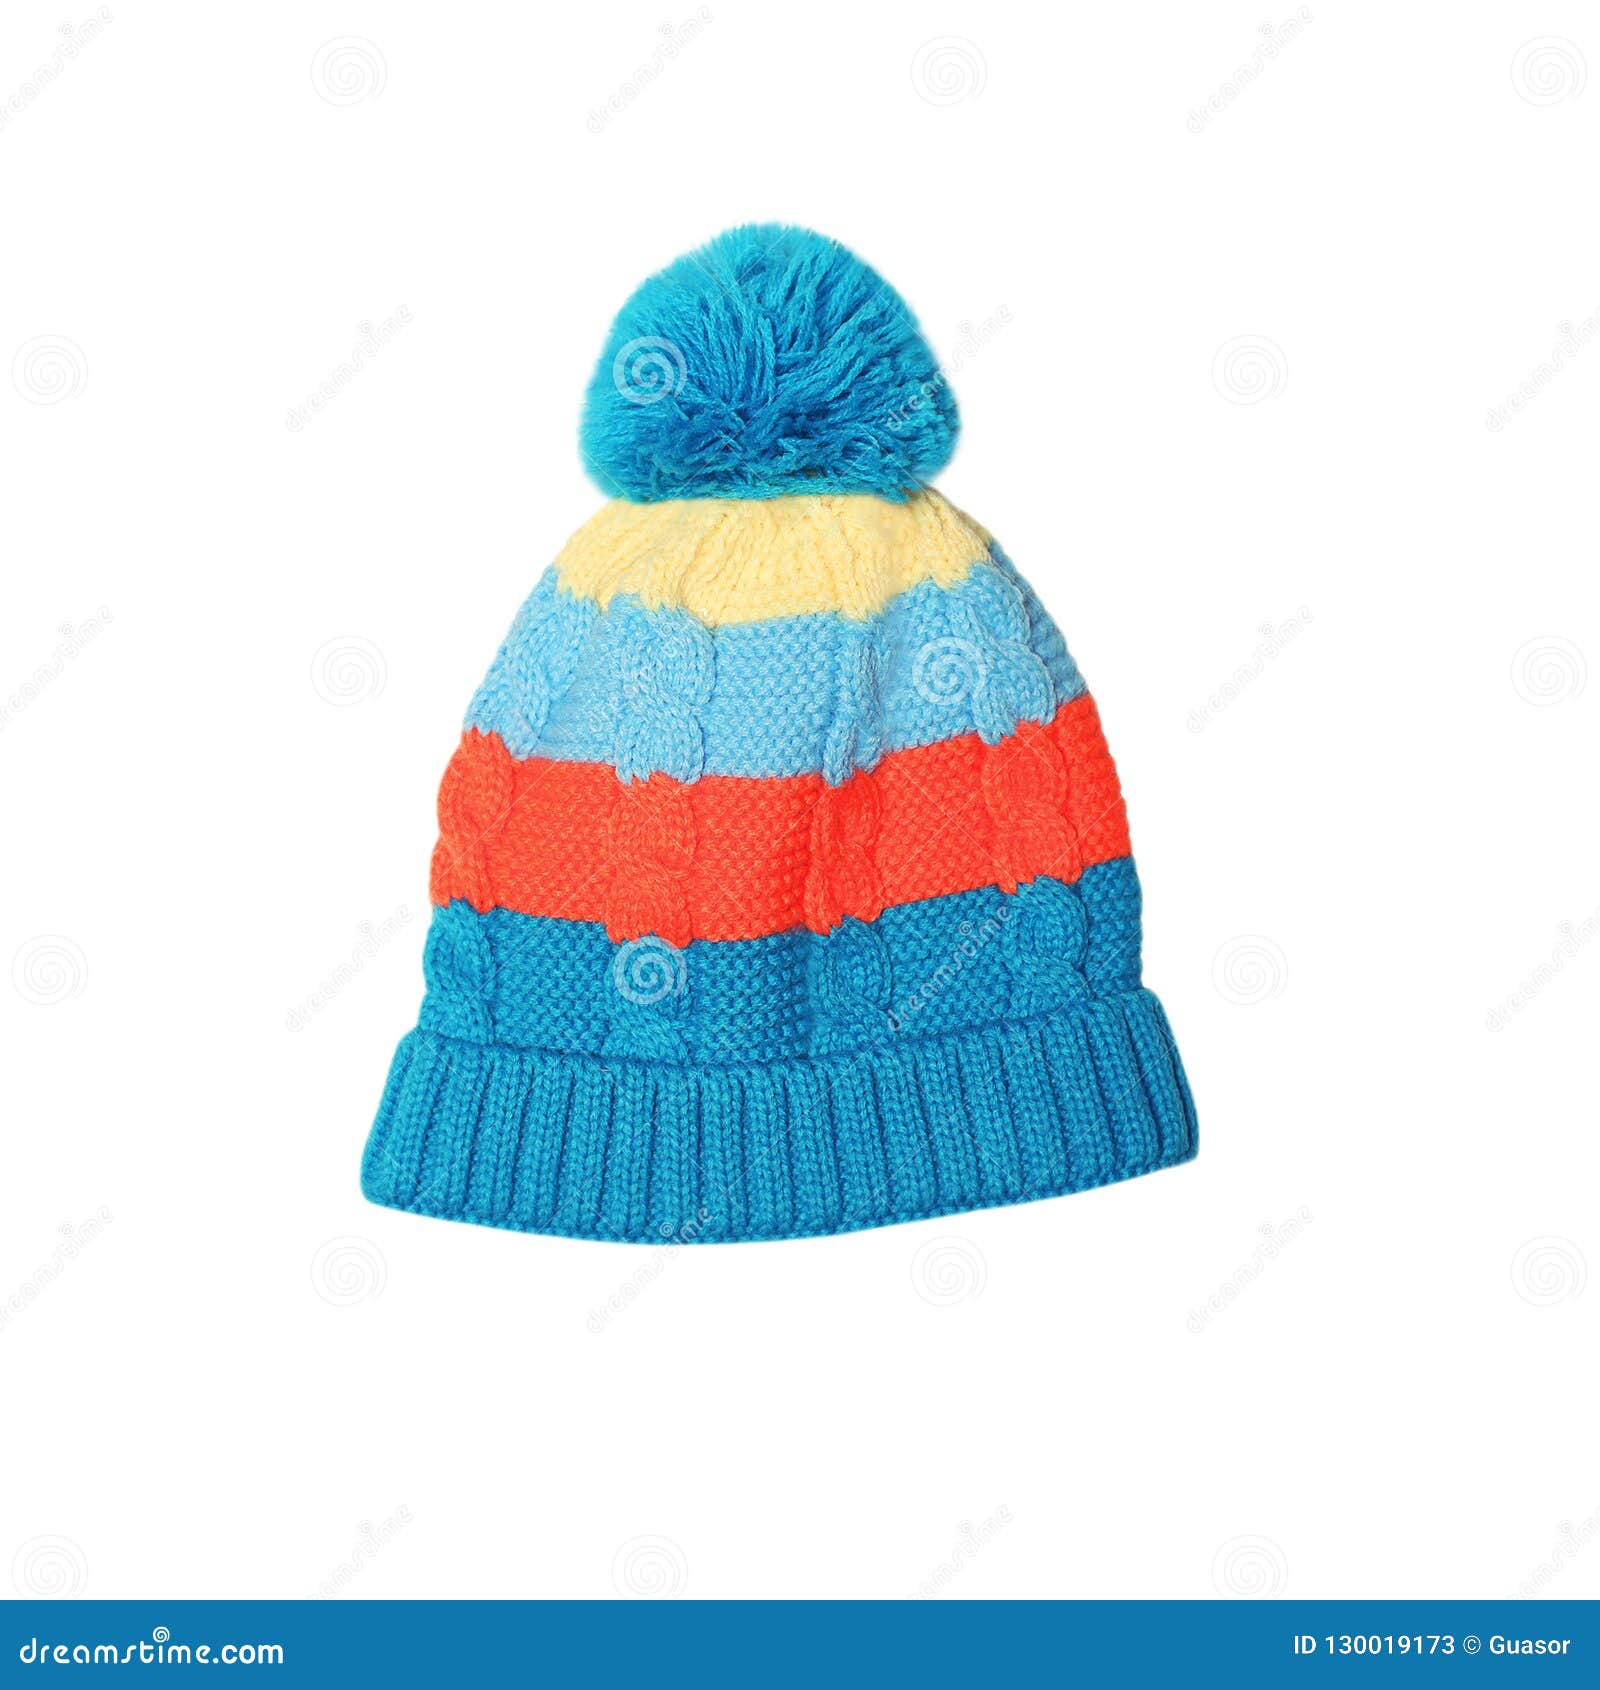 Bright Colorful Baby Knitted Hat Isolated on White Background Stock ...